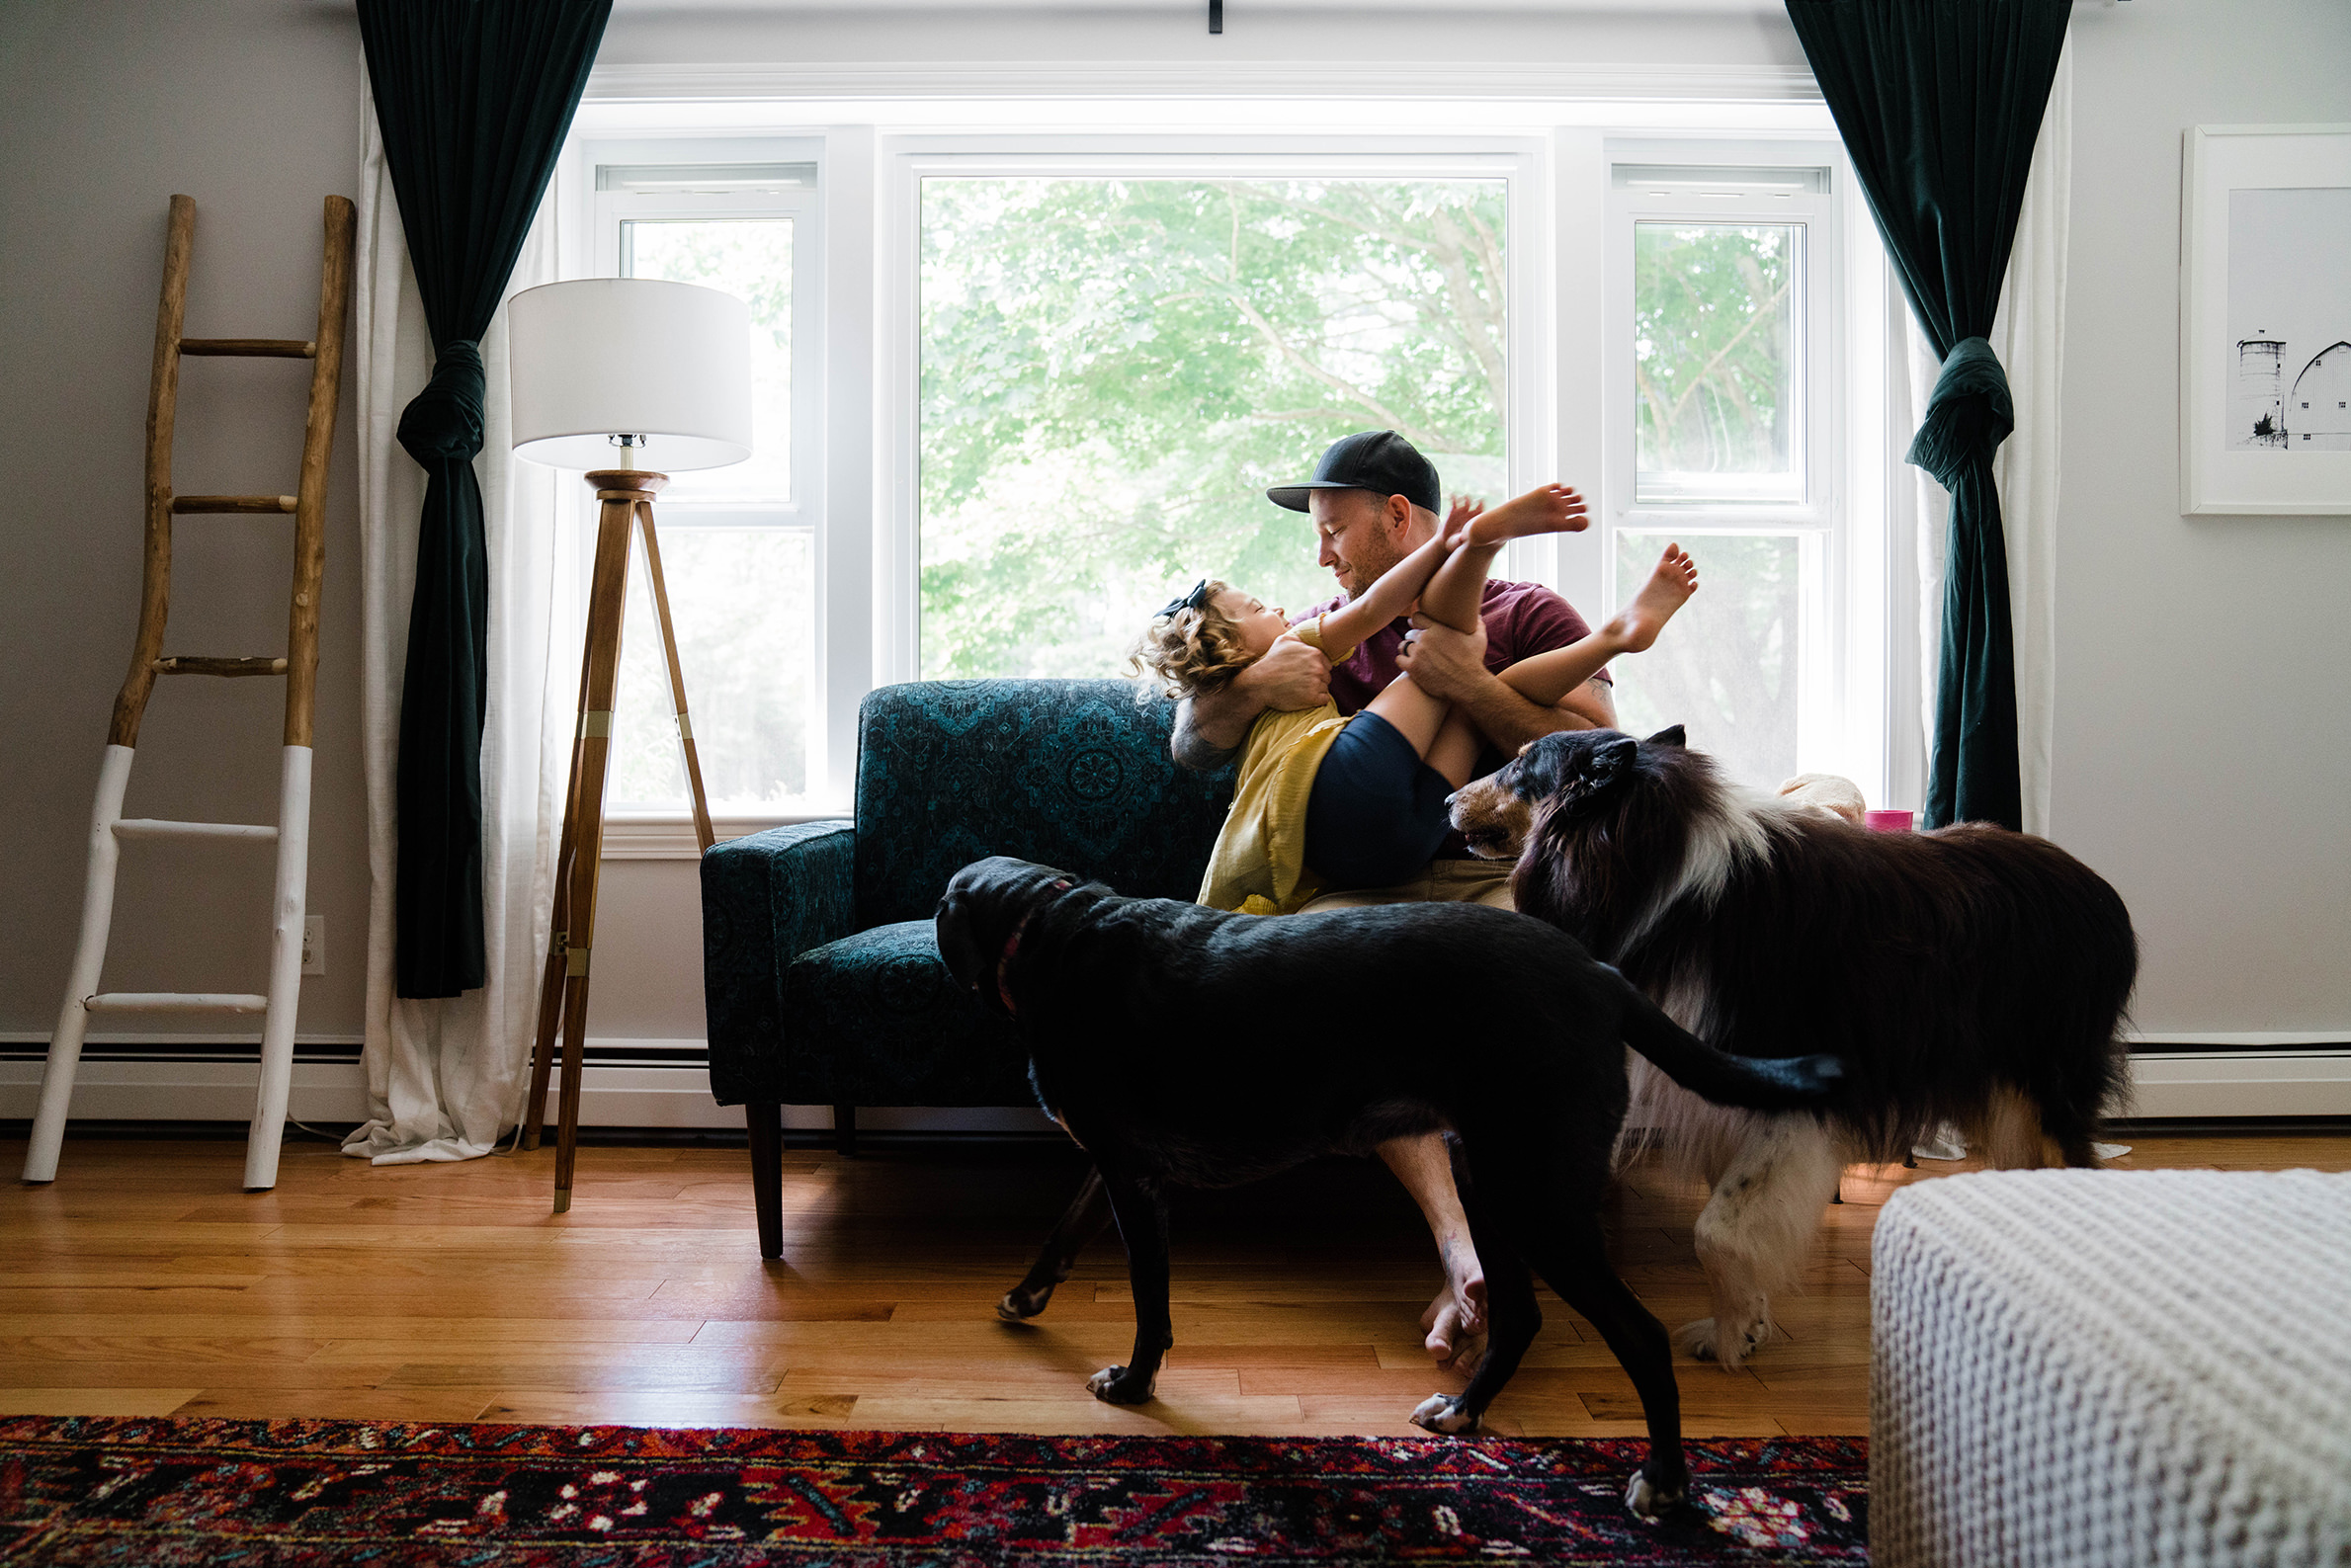 A documentary photograph of a dad playing with his daughter during an in home family session in Boston